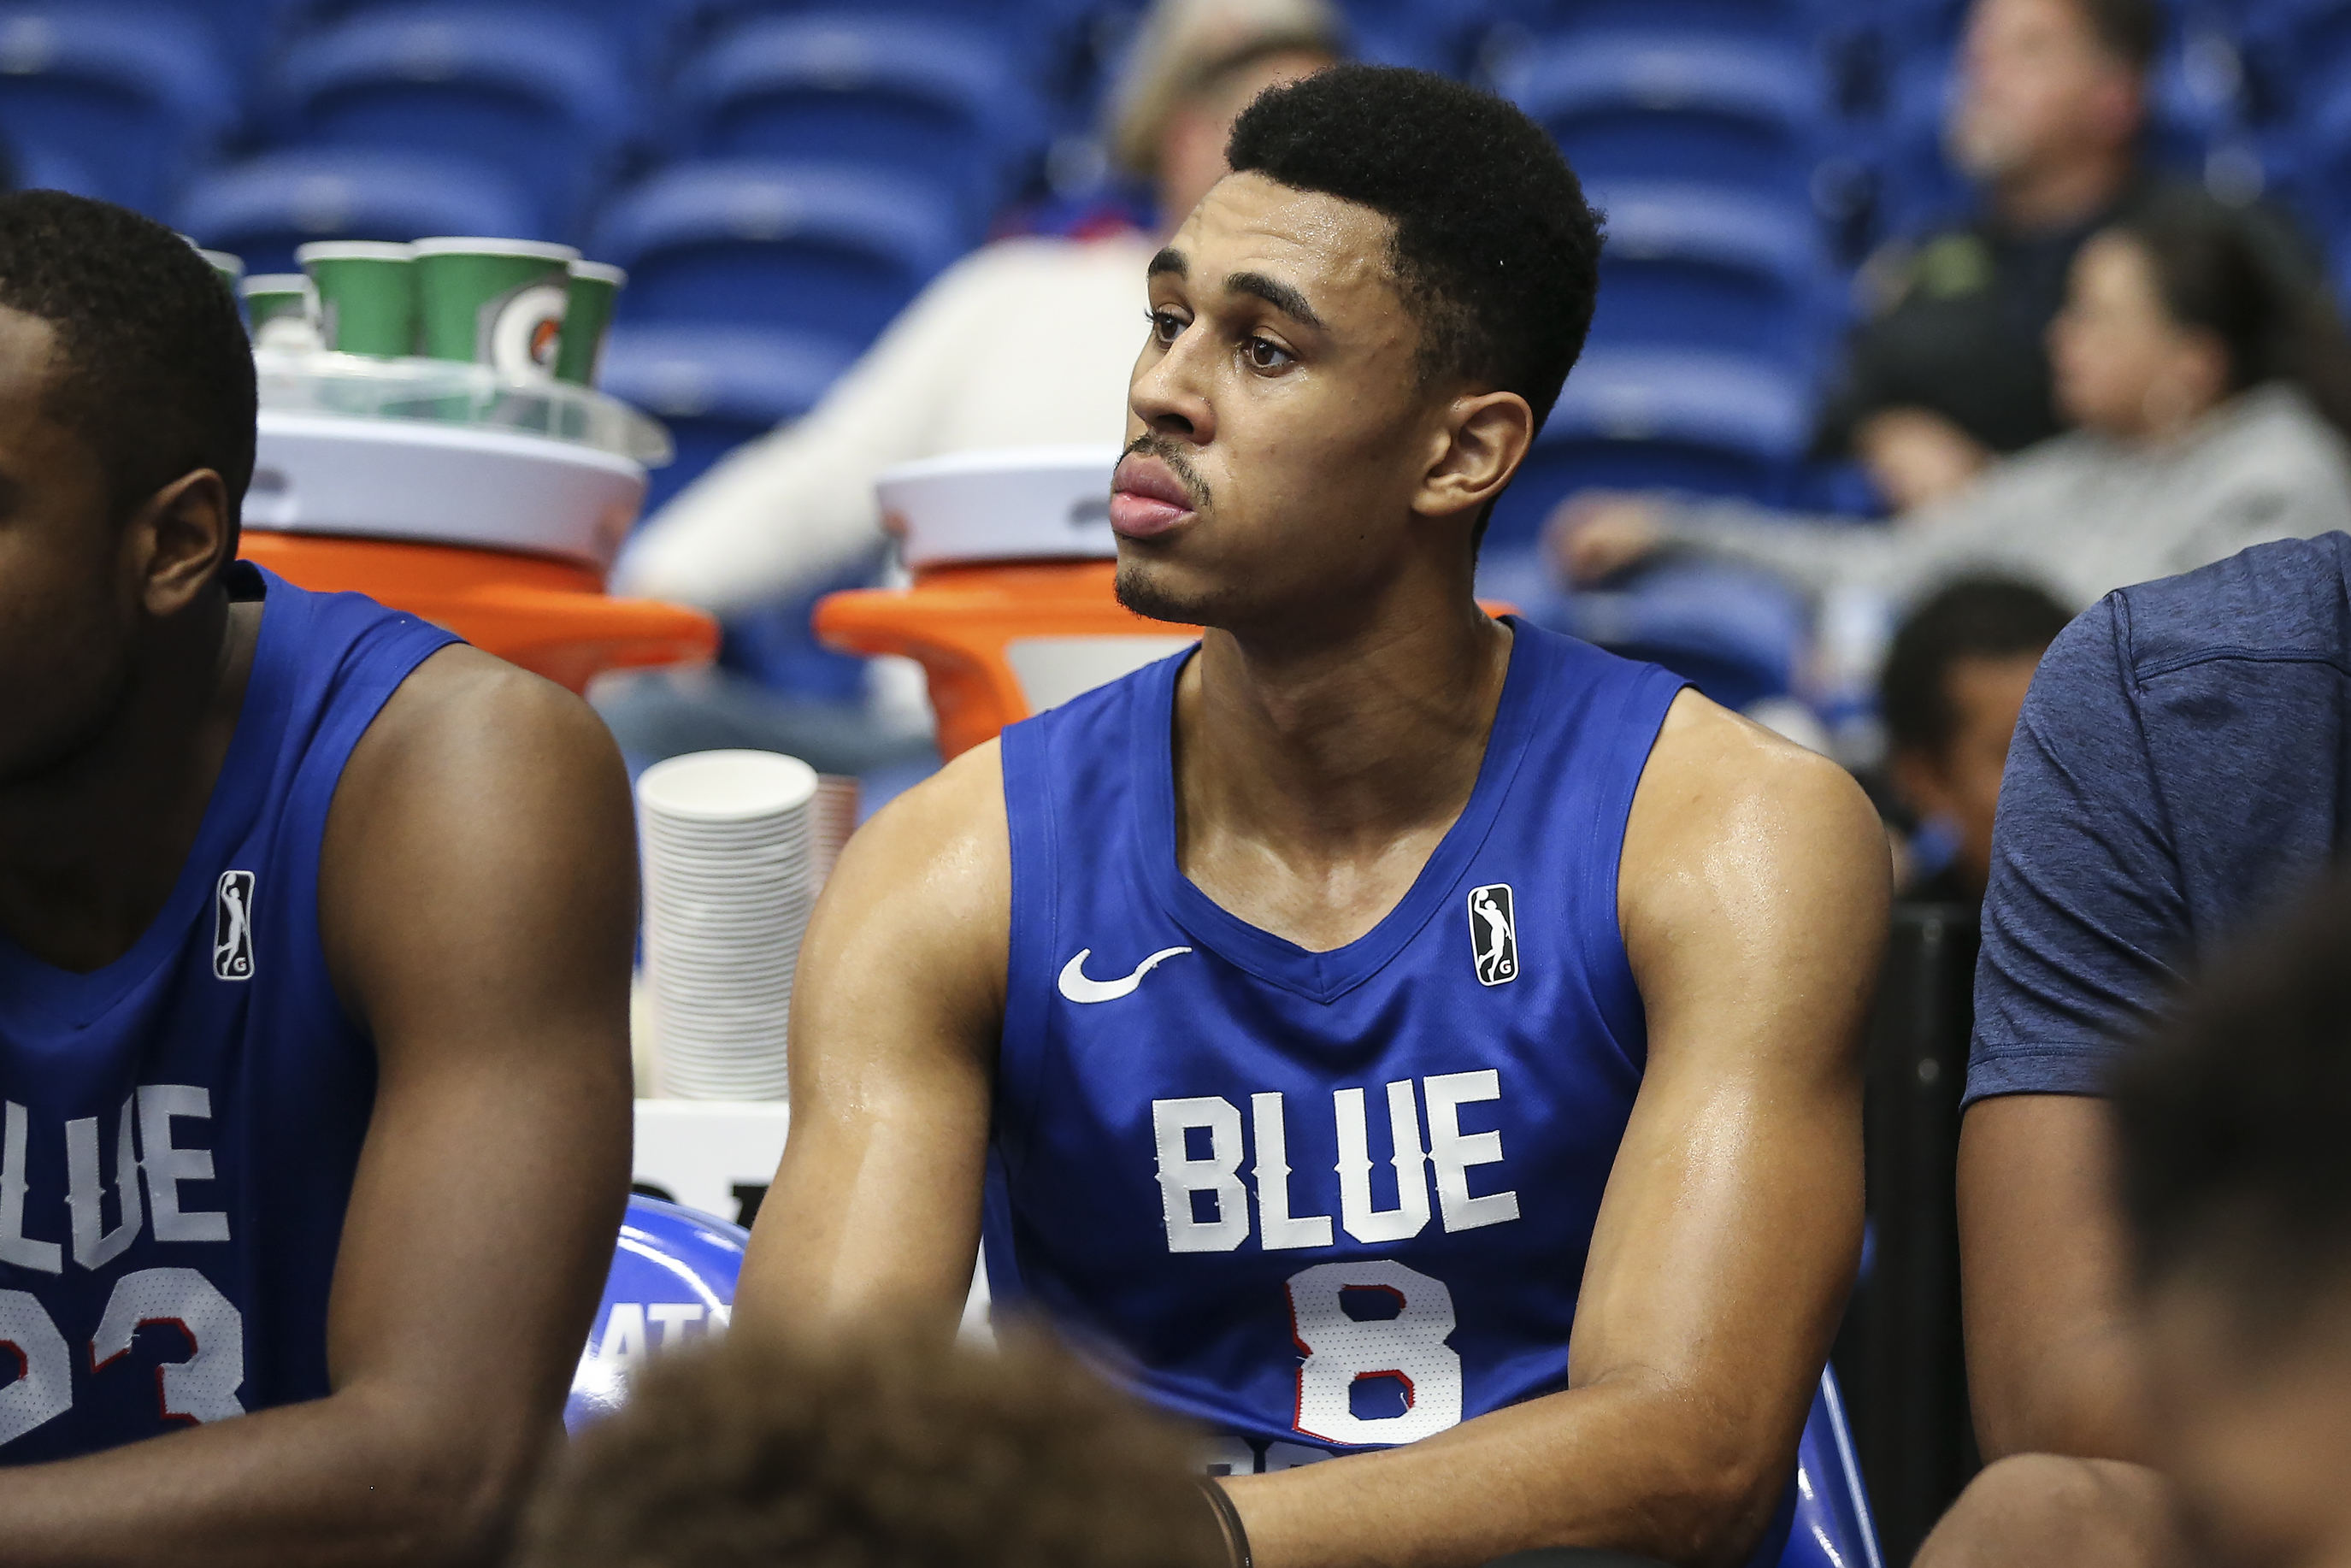 Sixers' Zhaire Smith has come a long way back from injury and illness,  motivated by his father